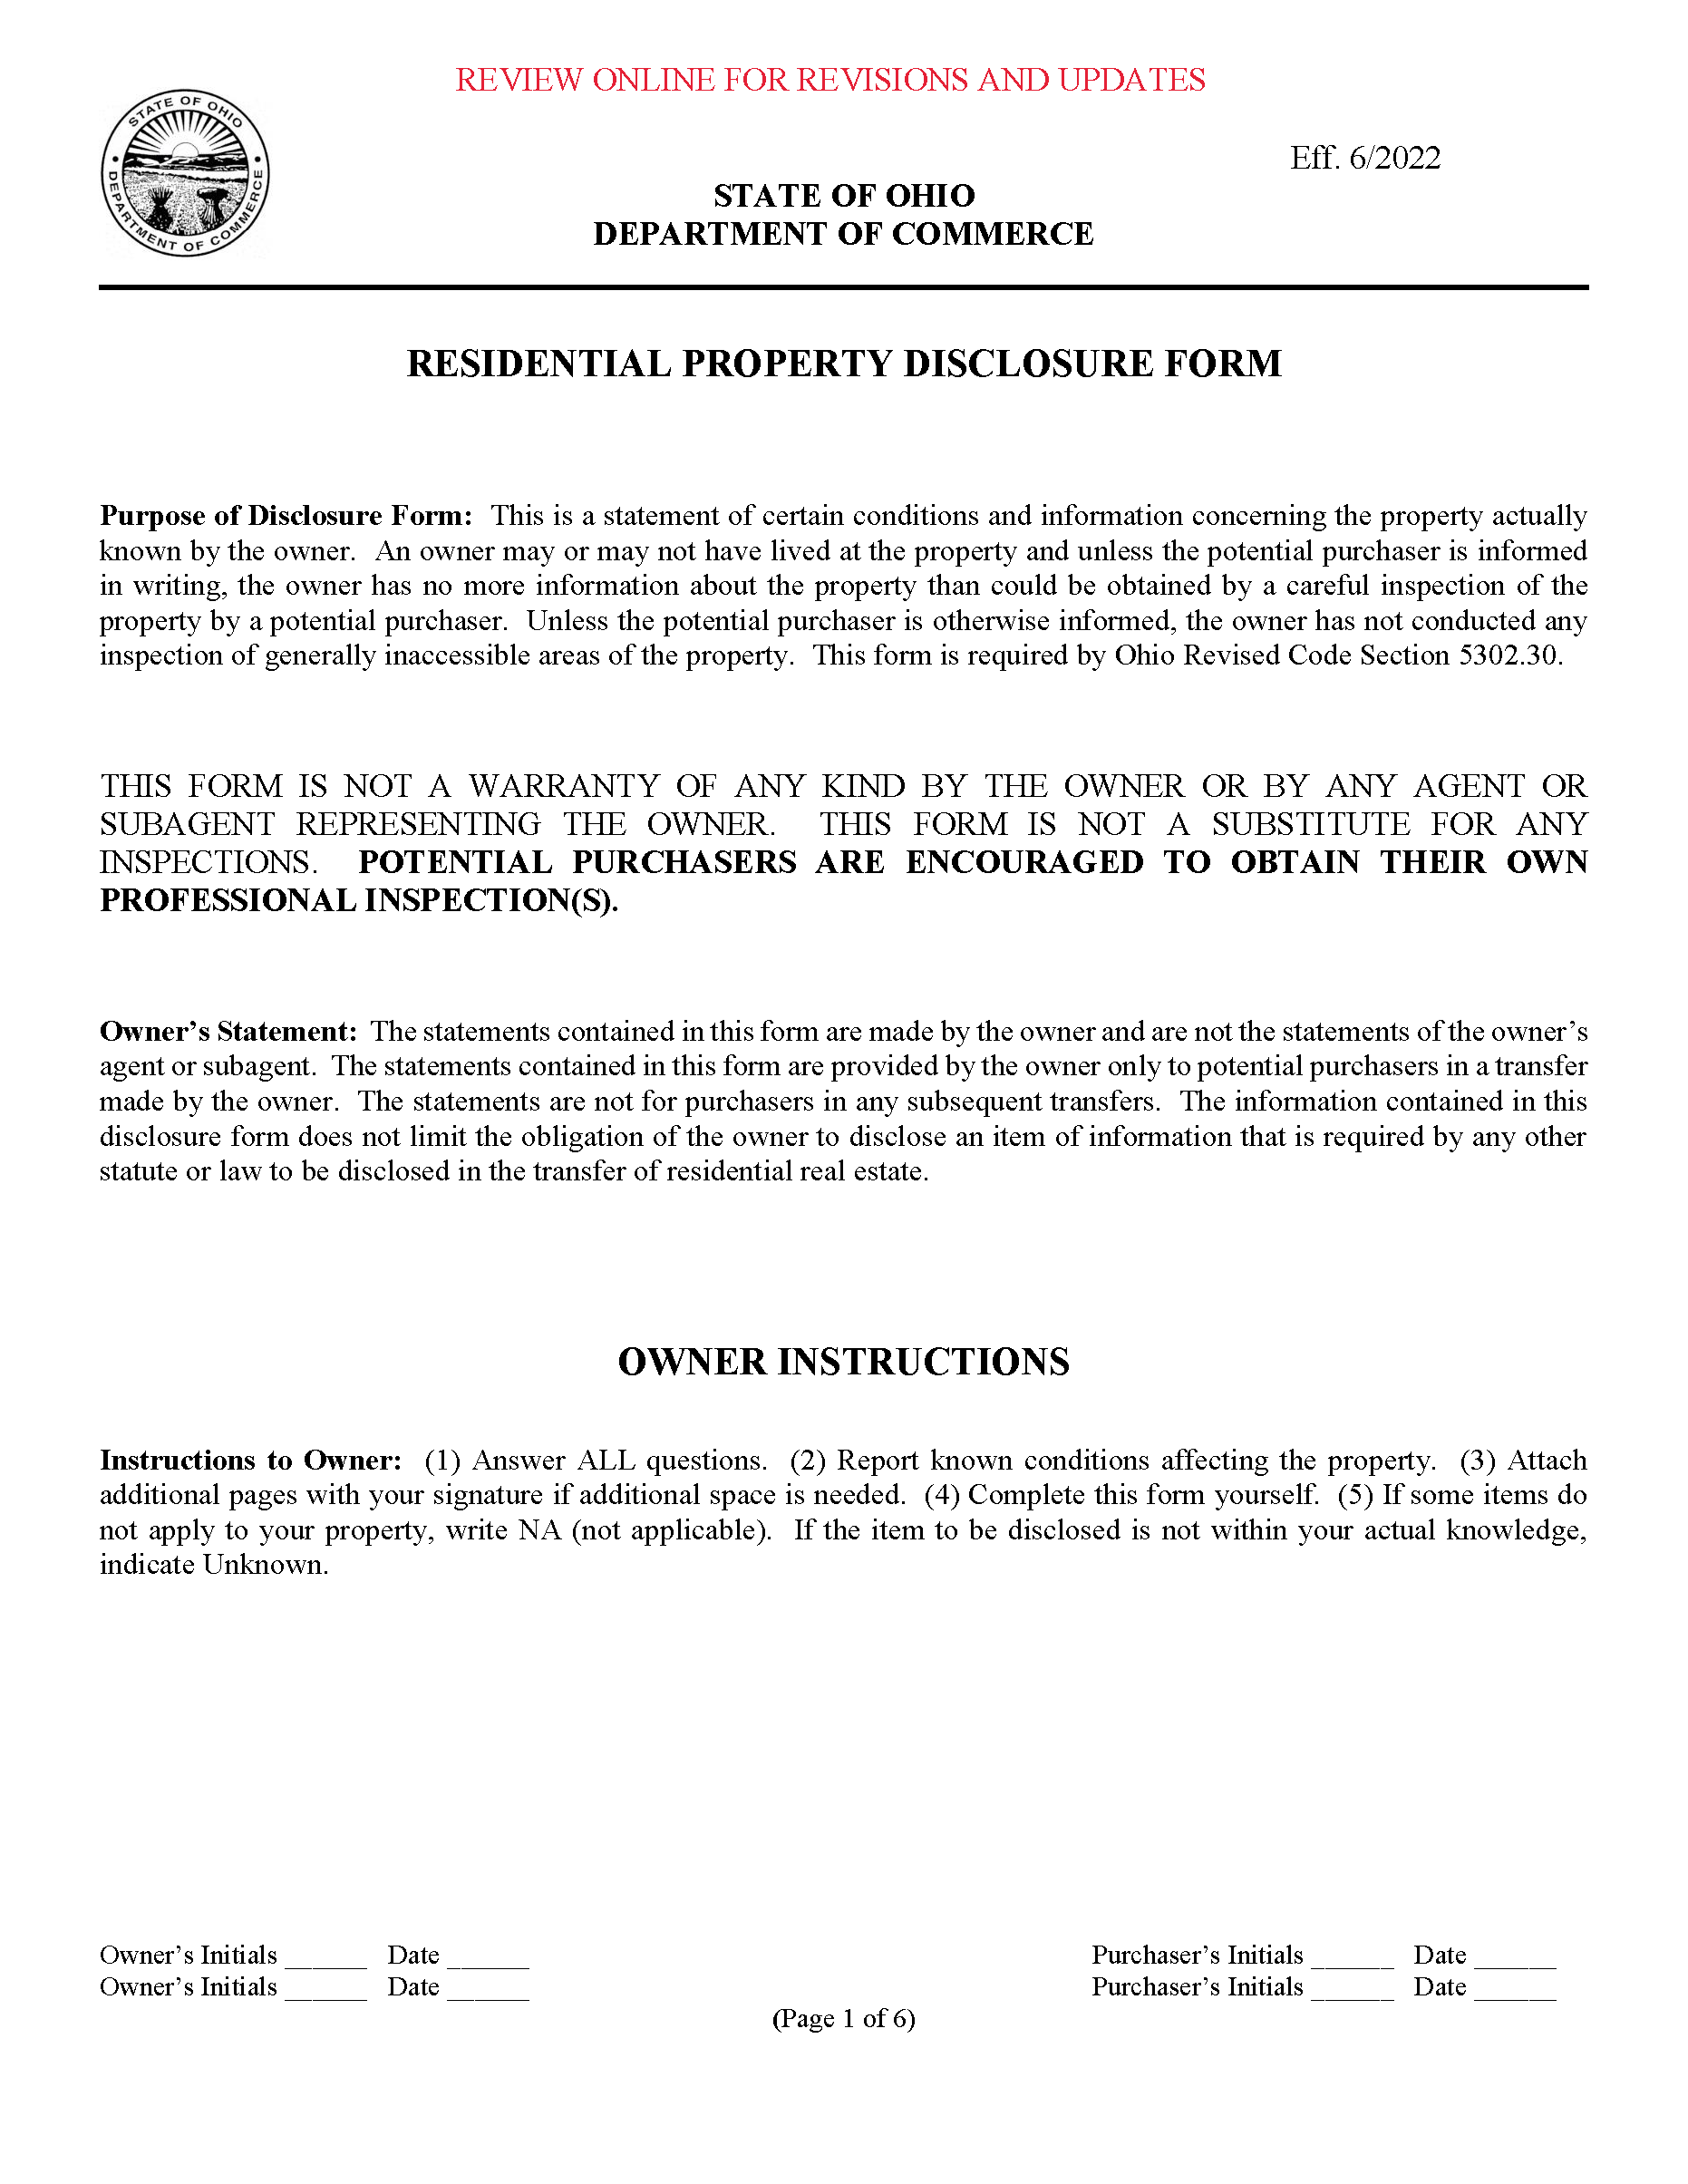 Portage County Residential Property Disclosure 